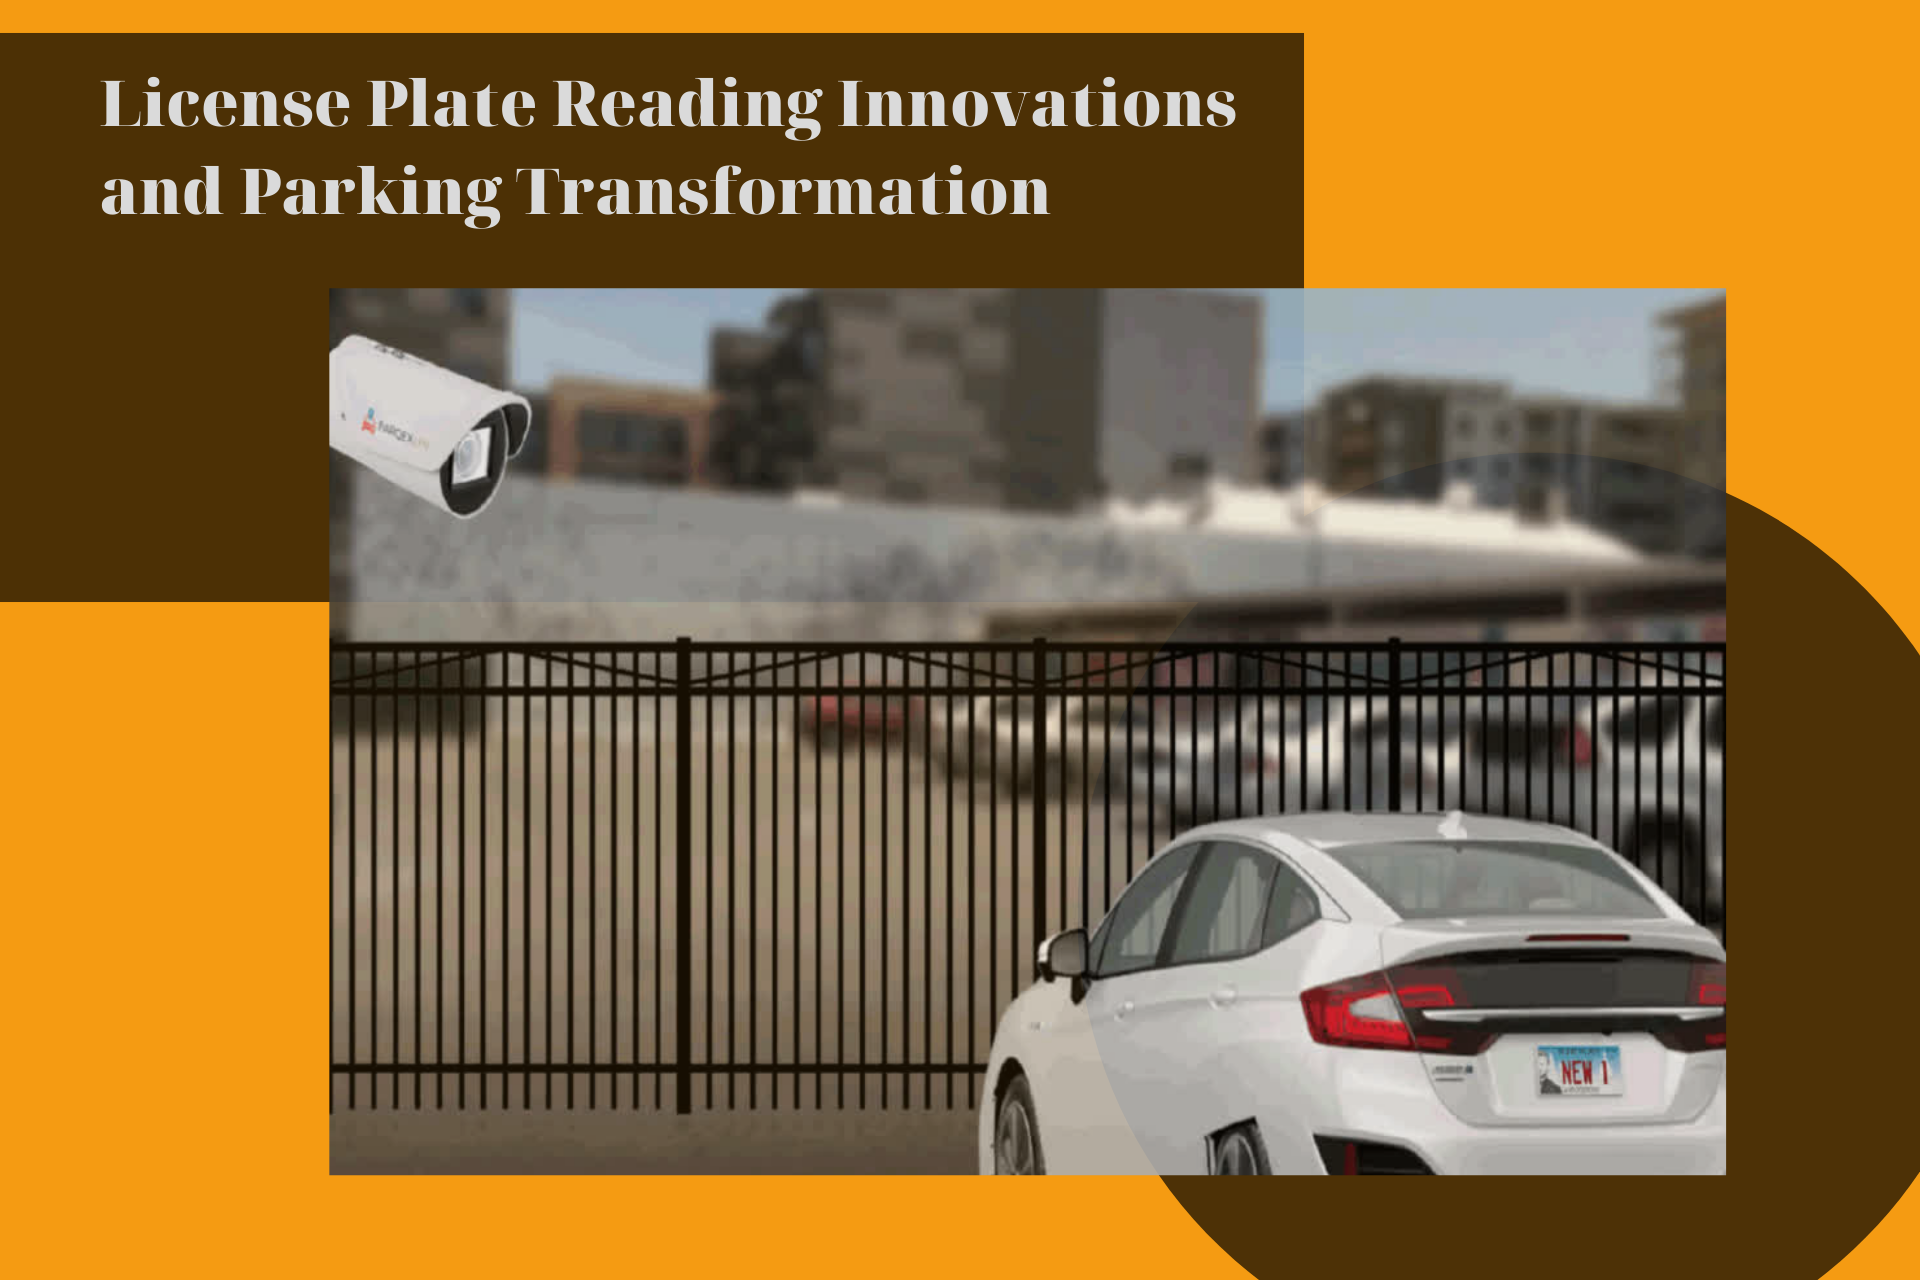 License Plate Reading Innovations and Parking Transformation